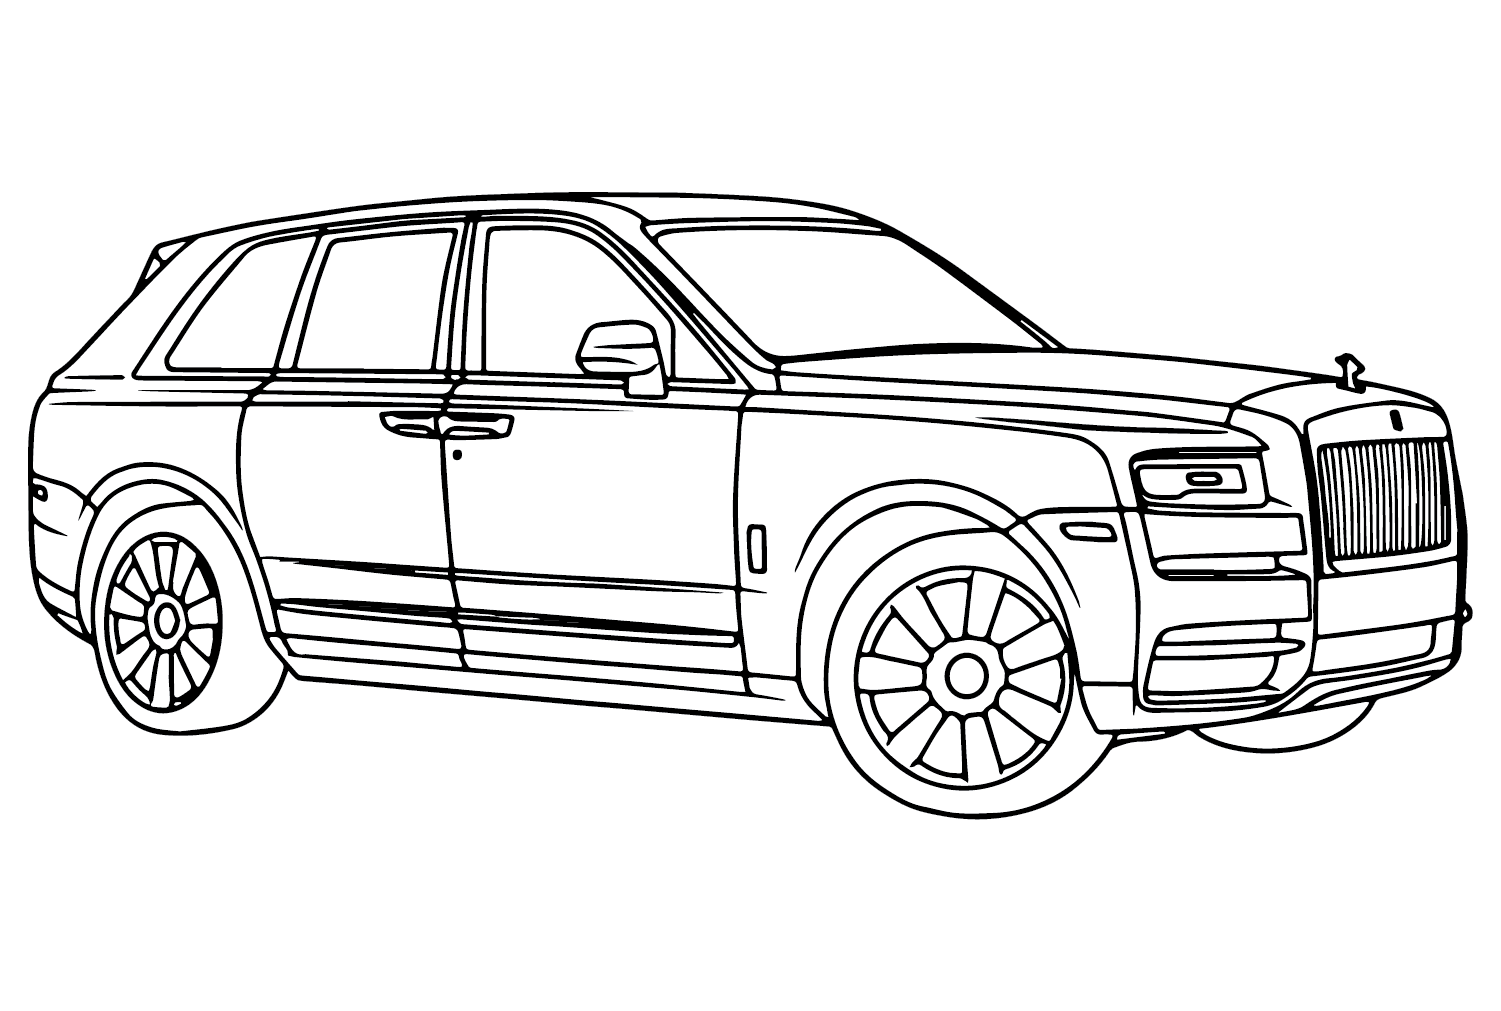 Rolls Royce Cullinan Coloring Page